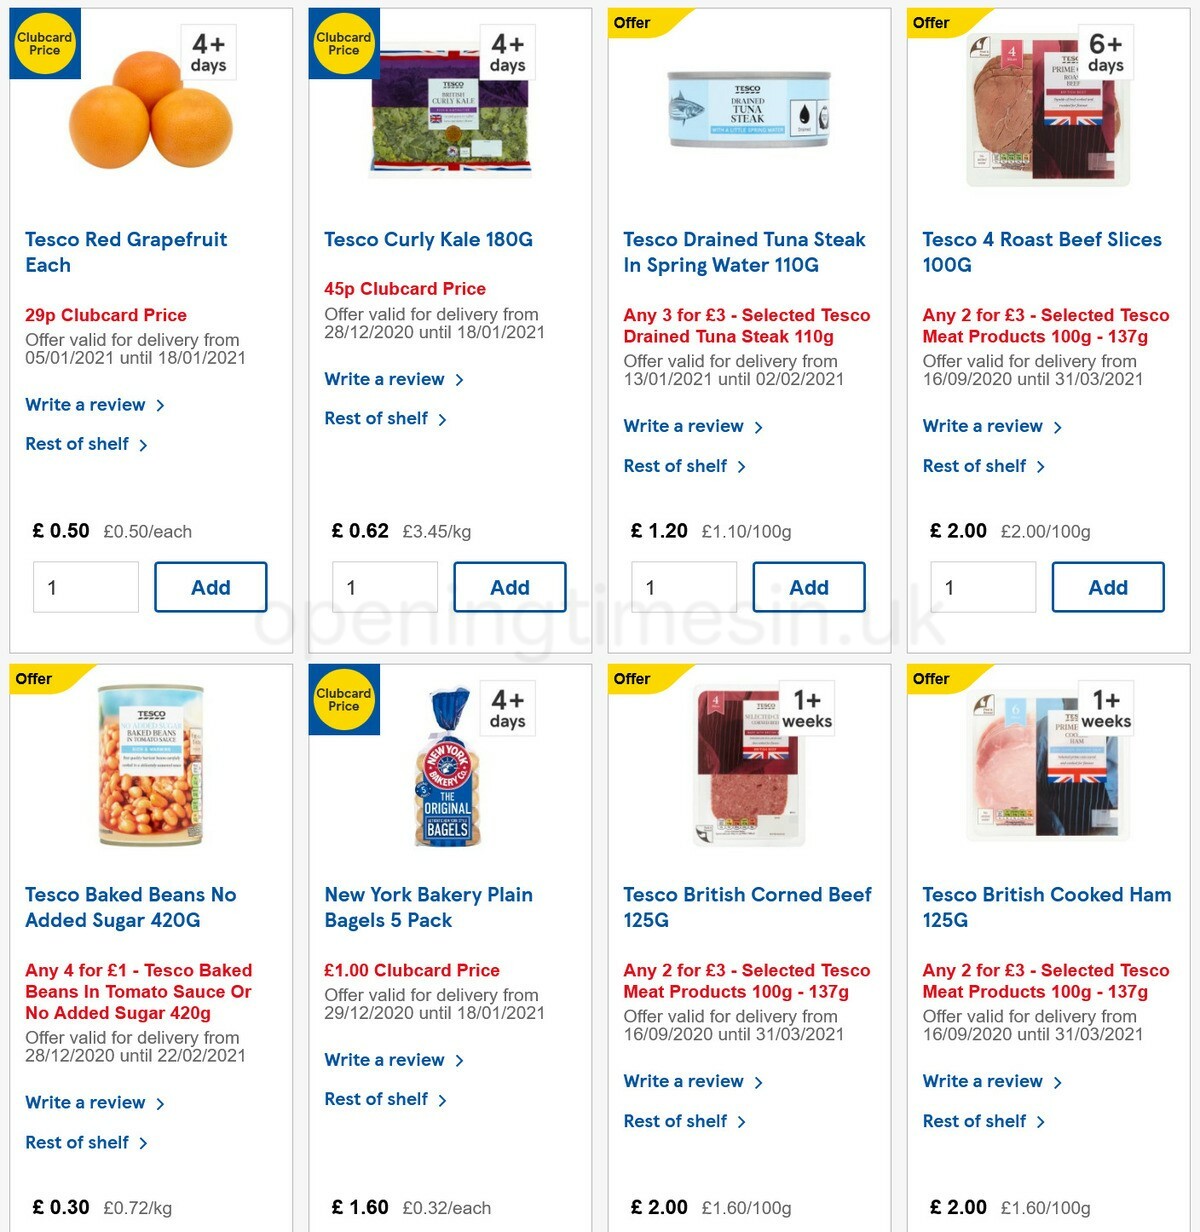 TESCO Offers from 13 January